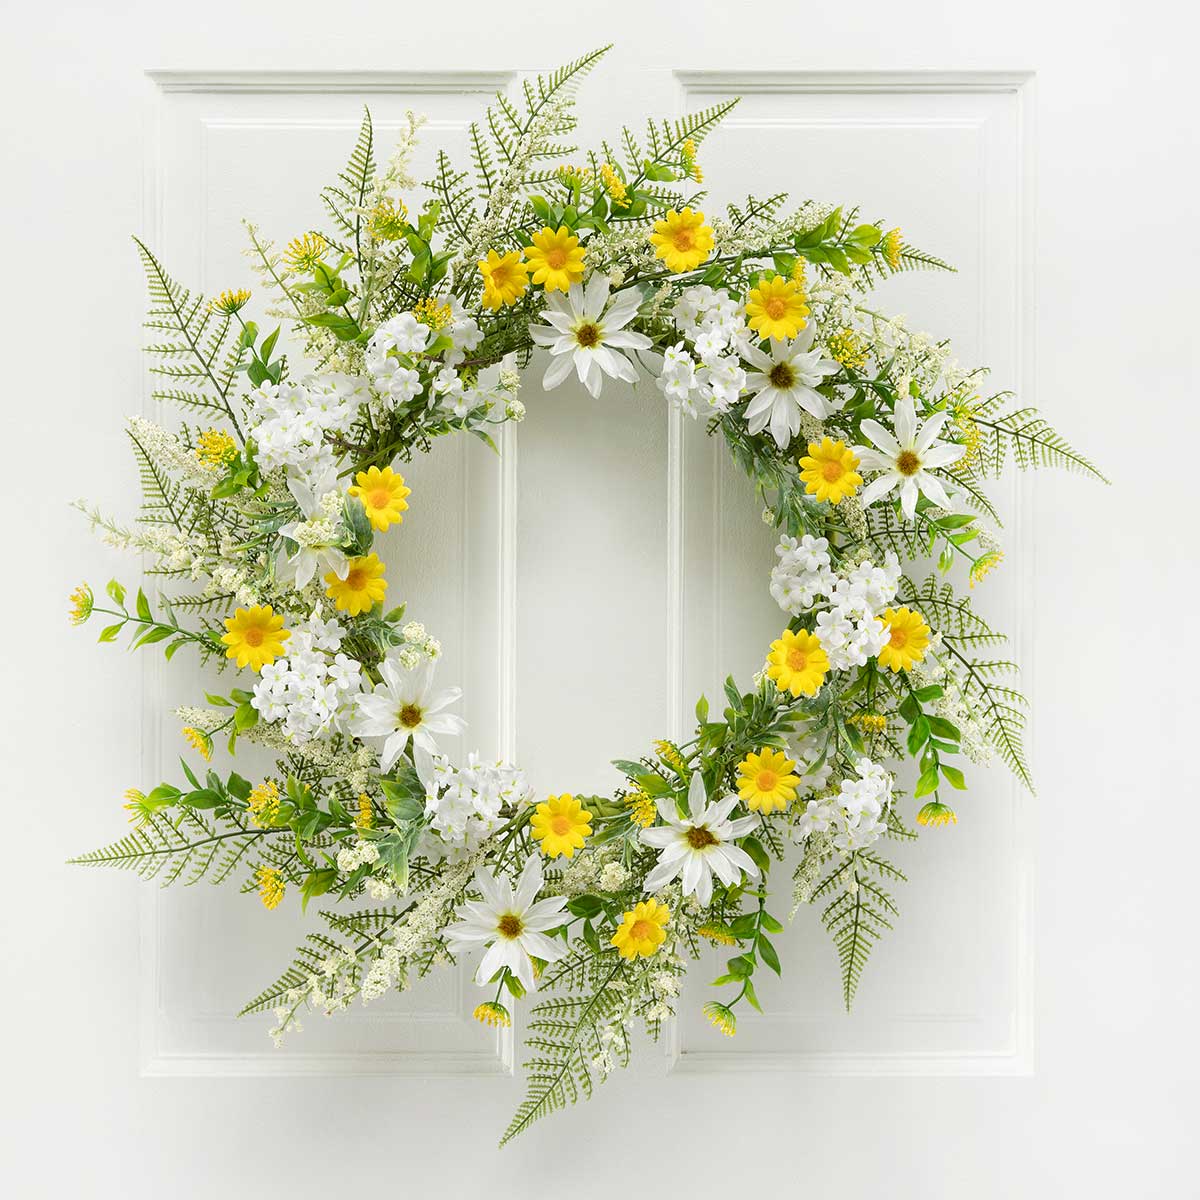 WREATH SUMMERTIME DAISY 22IN (INNER RING 12IN) POLYESTER/PLASTIC - Click Image to Close